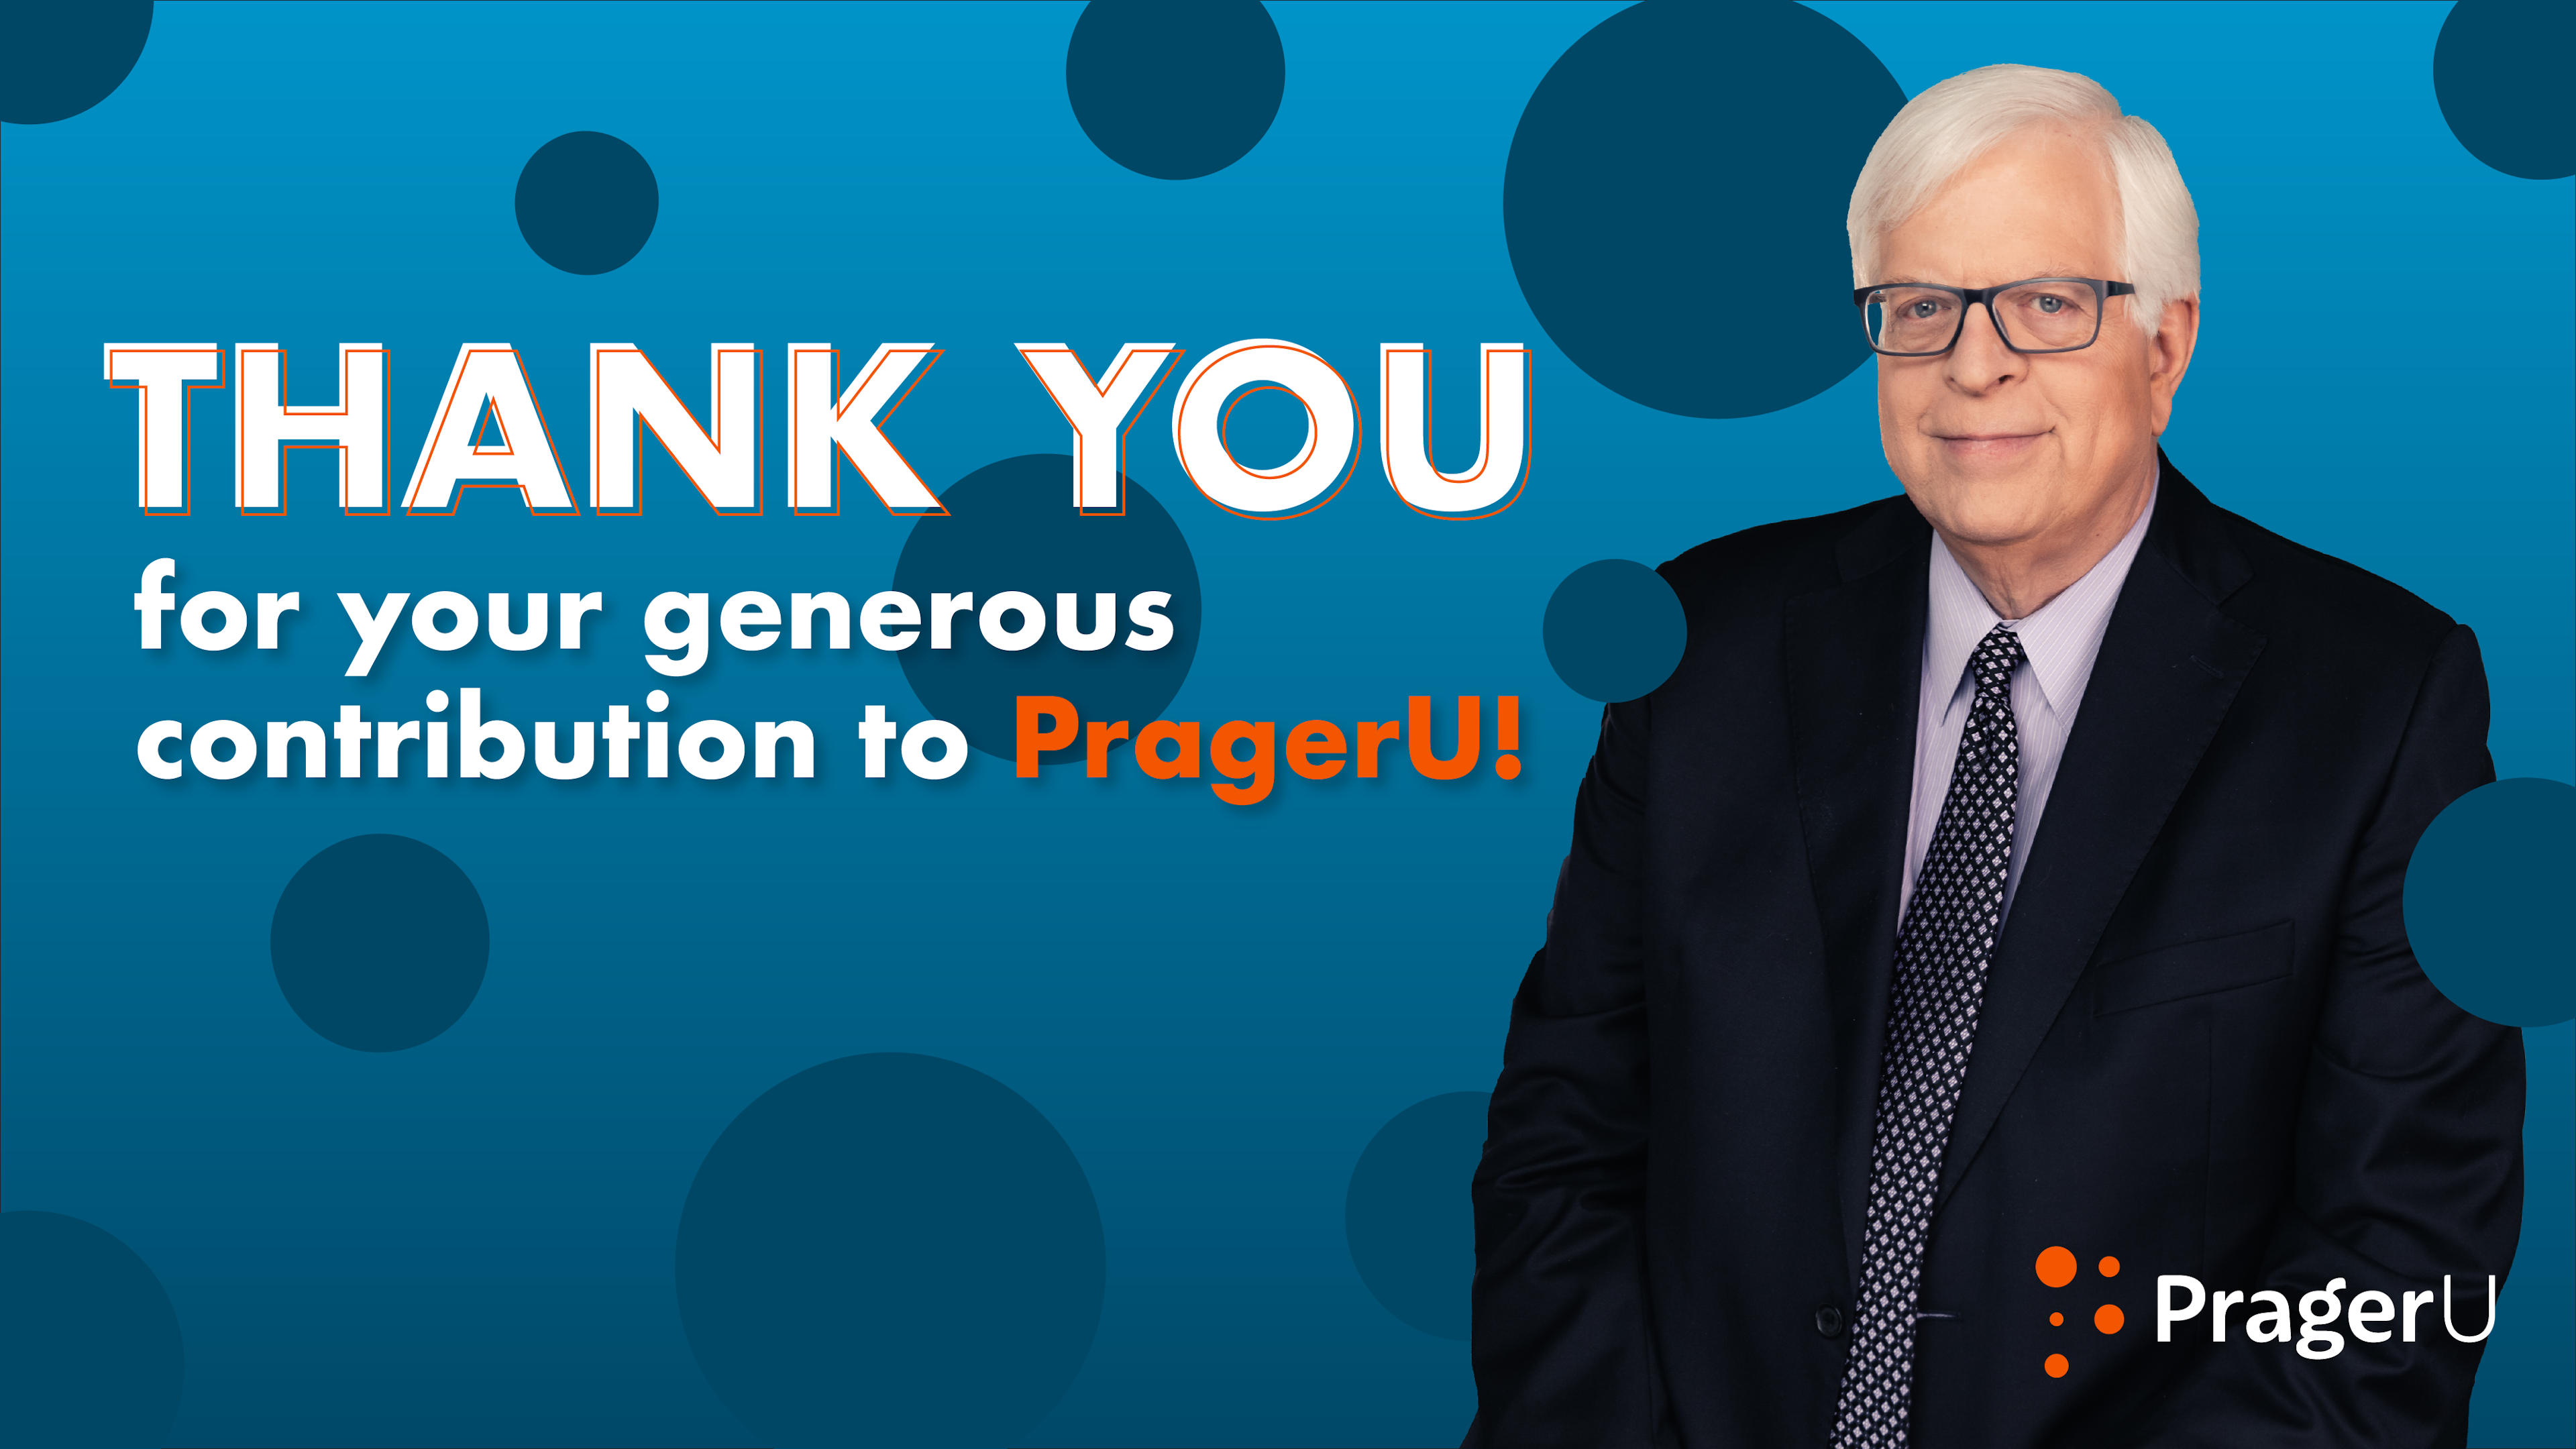 Thank You Message from Dennis Prager